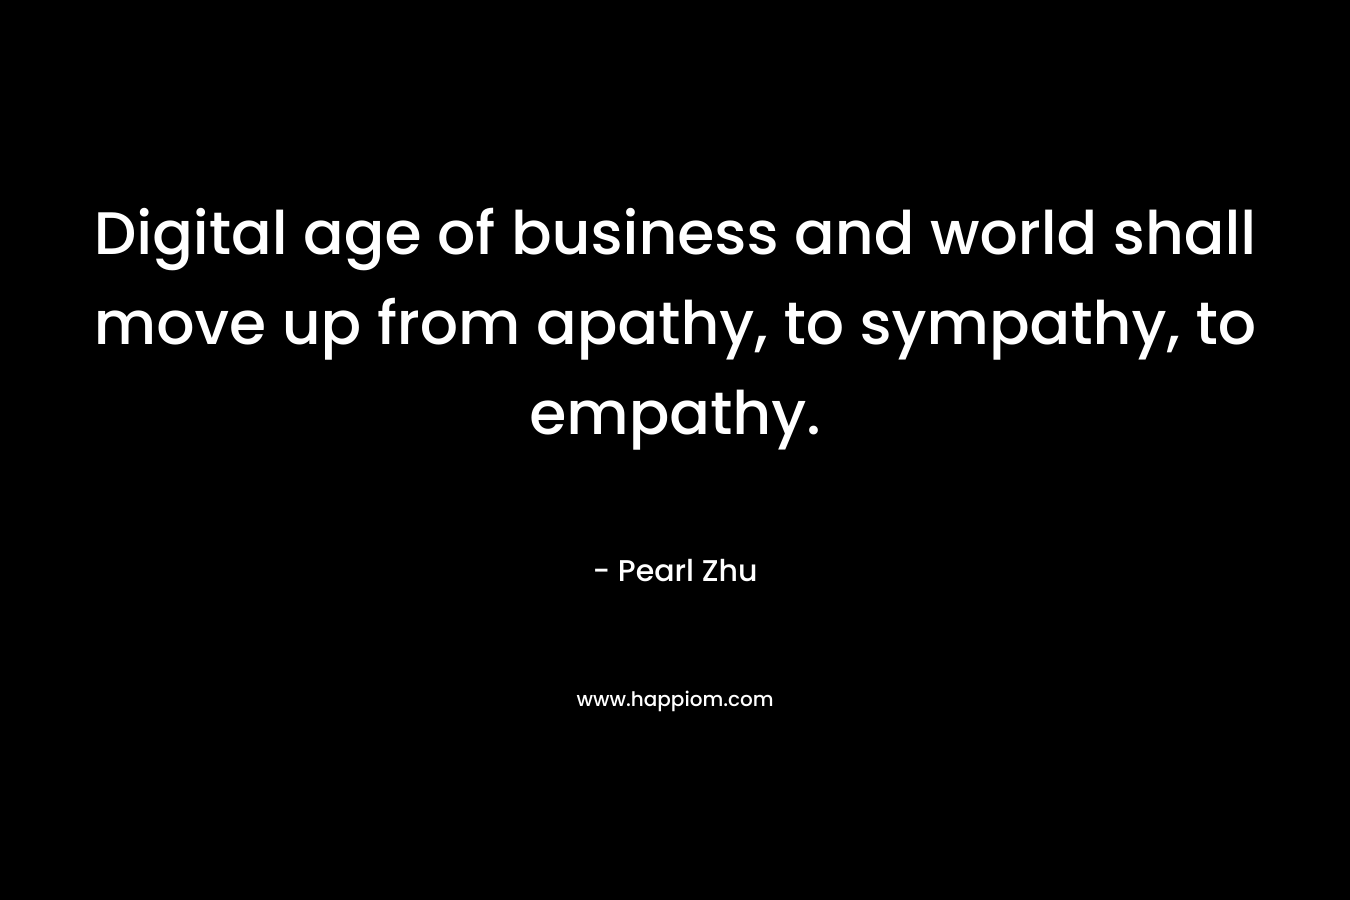 Digital age of business and world shall move up from apathy, to sympathy, to empathy. – Pearl Zhu